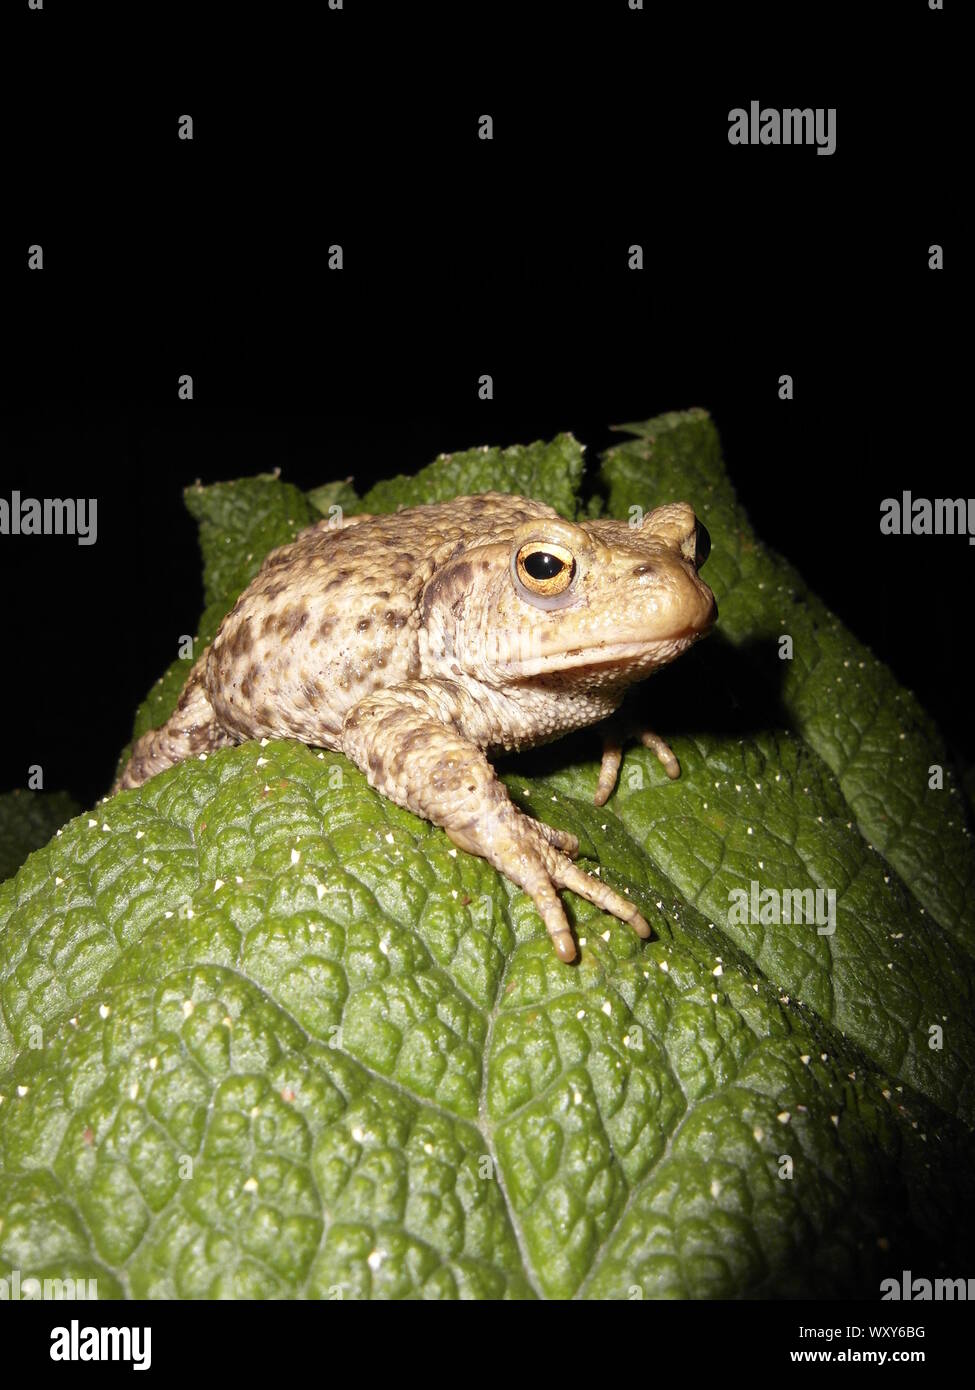 A TOAD RESTS ON THE LEAF OF A GUNMERA PLANT AT NIGHT IN A GARDEN IN ESSEX, ENGLAND. WILDLIFE IN THE UK. BRITISH WILDLIFE. SUB TROPICAL PLANTS. TROPICAL PLANTS. LATIN AMERICA. GUNNERA INSIGNIS. AMPHIBIANS. TOAD. LISSAMPHIBIA. Stock Photo